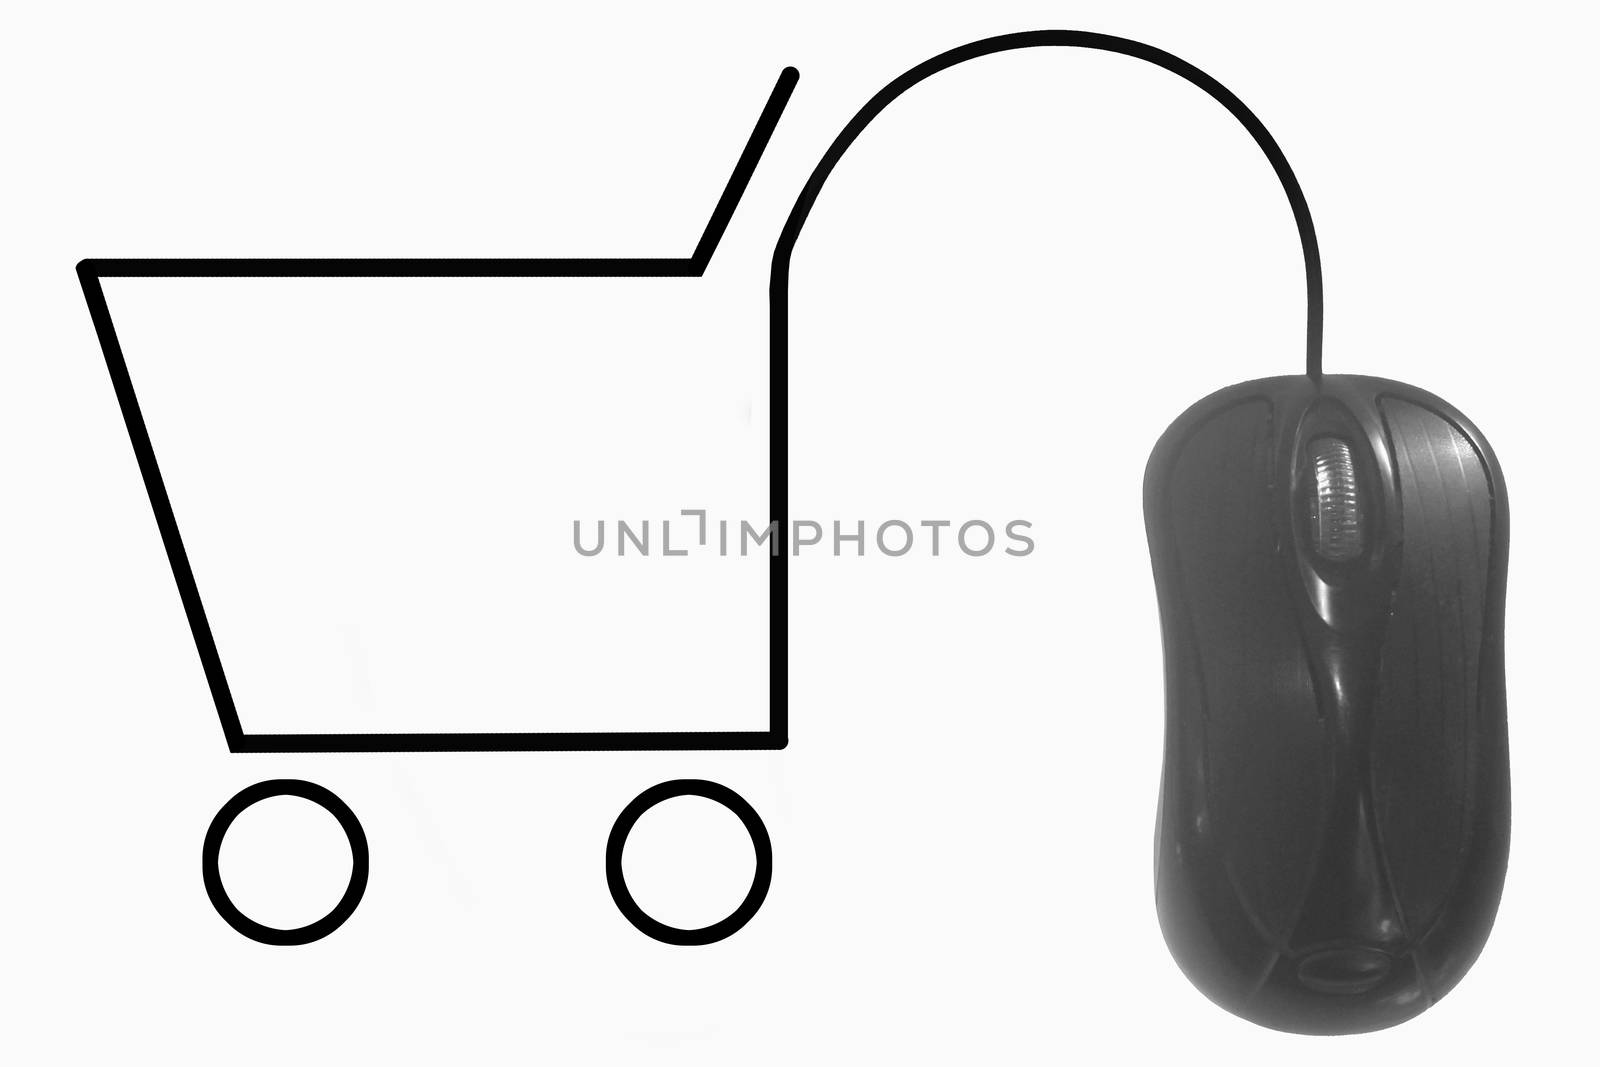 Shopping cart depicted by computer mouse cable